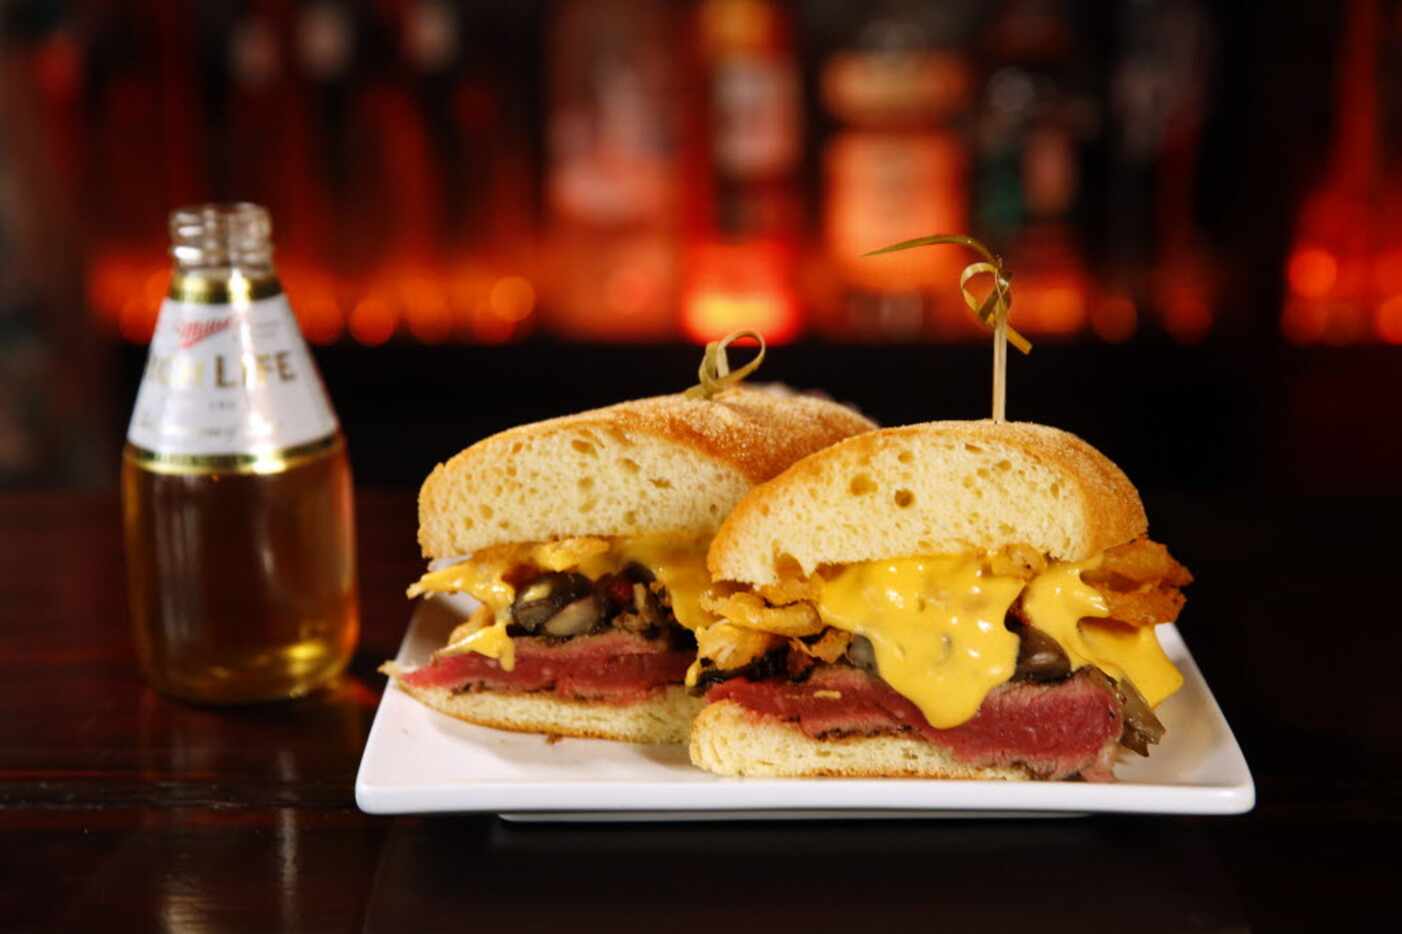 The Steak and Cheese sandwich comes with grilled ribeye, mushroom ragout, cheddar foam,...